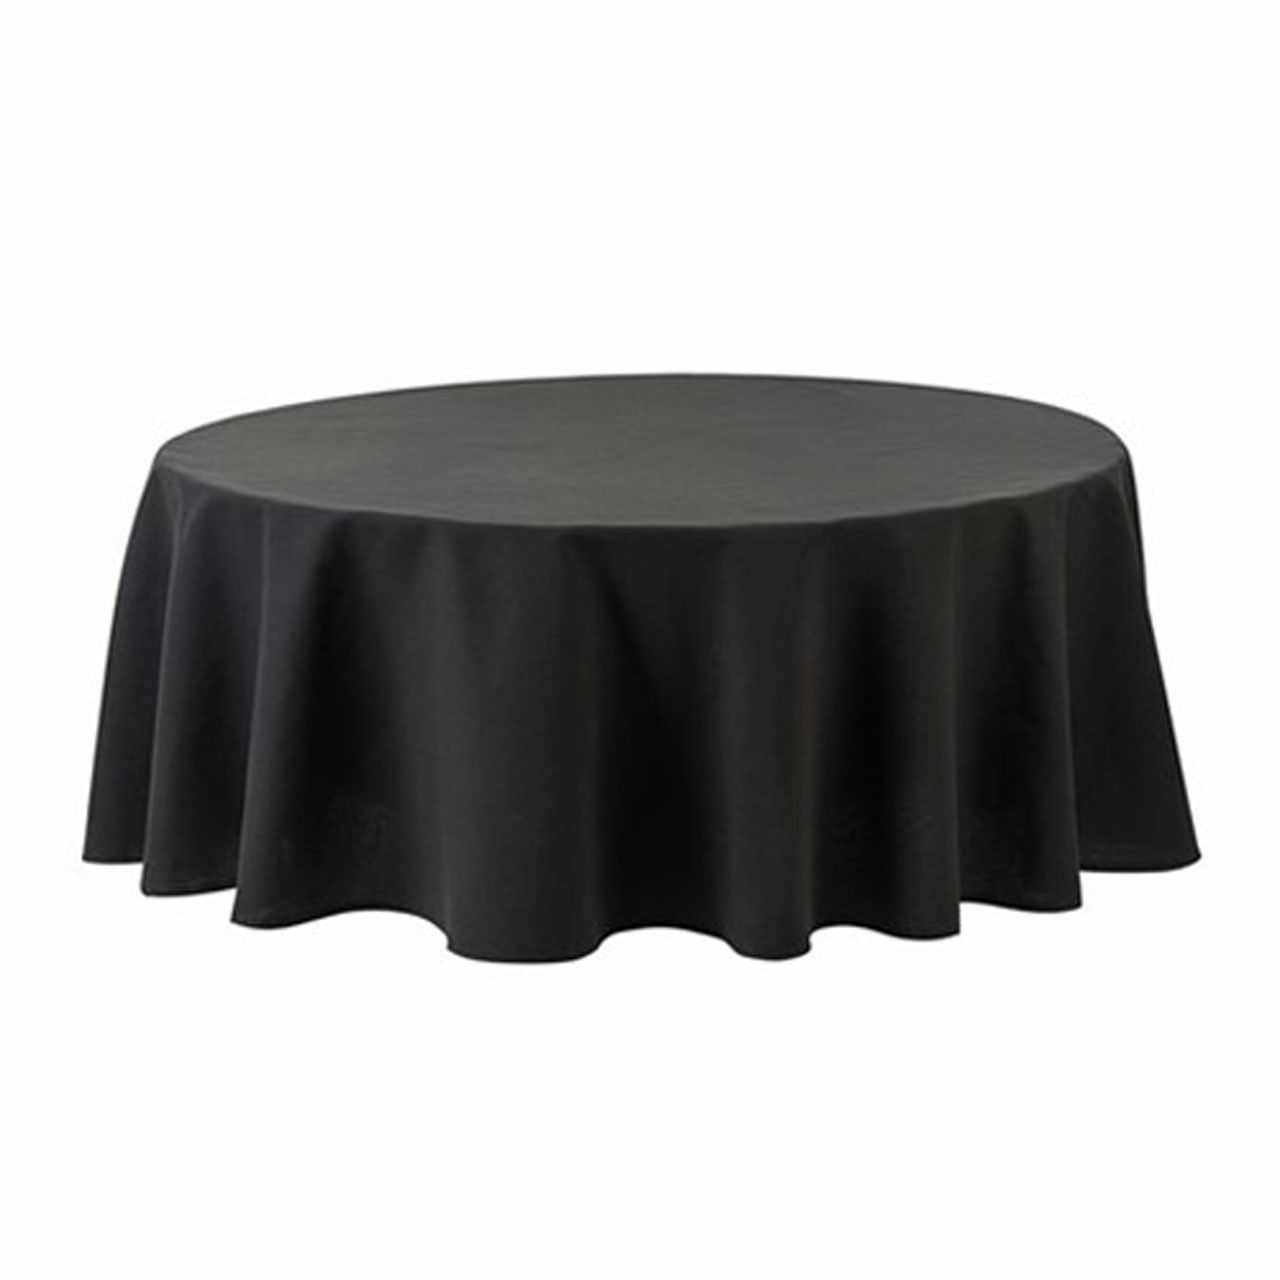 Where will my black round tablecloth be shipped from?